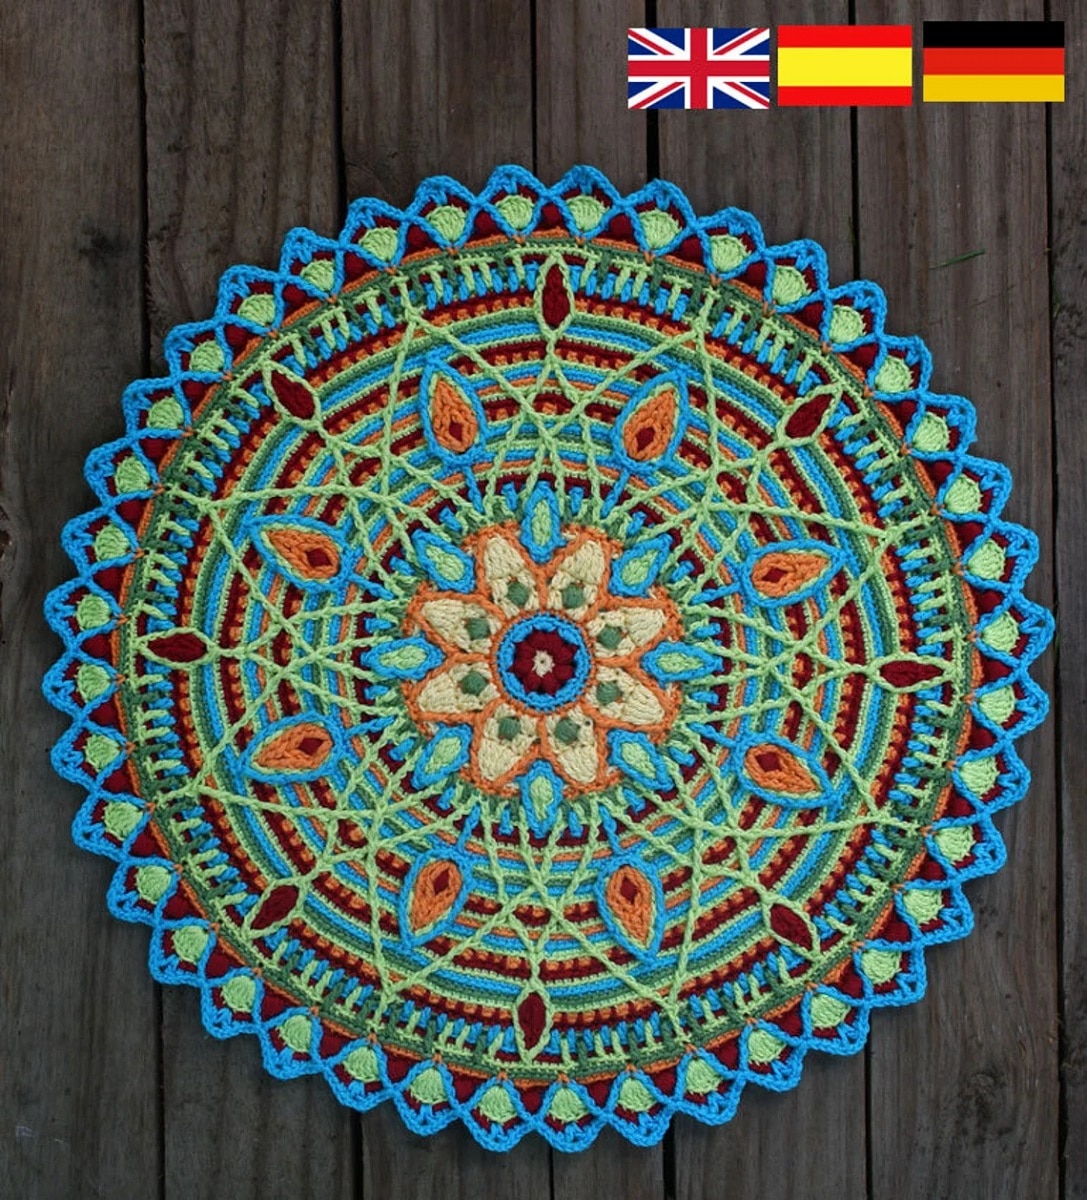  A blue, green, red, and orange round crochet doily with a large mandala in the center on a gray wooden floor.